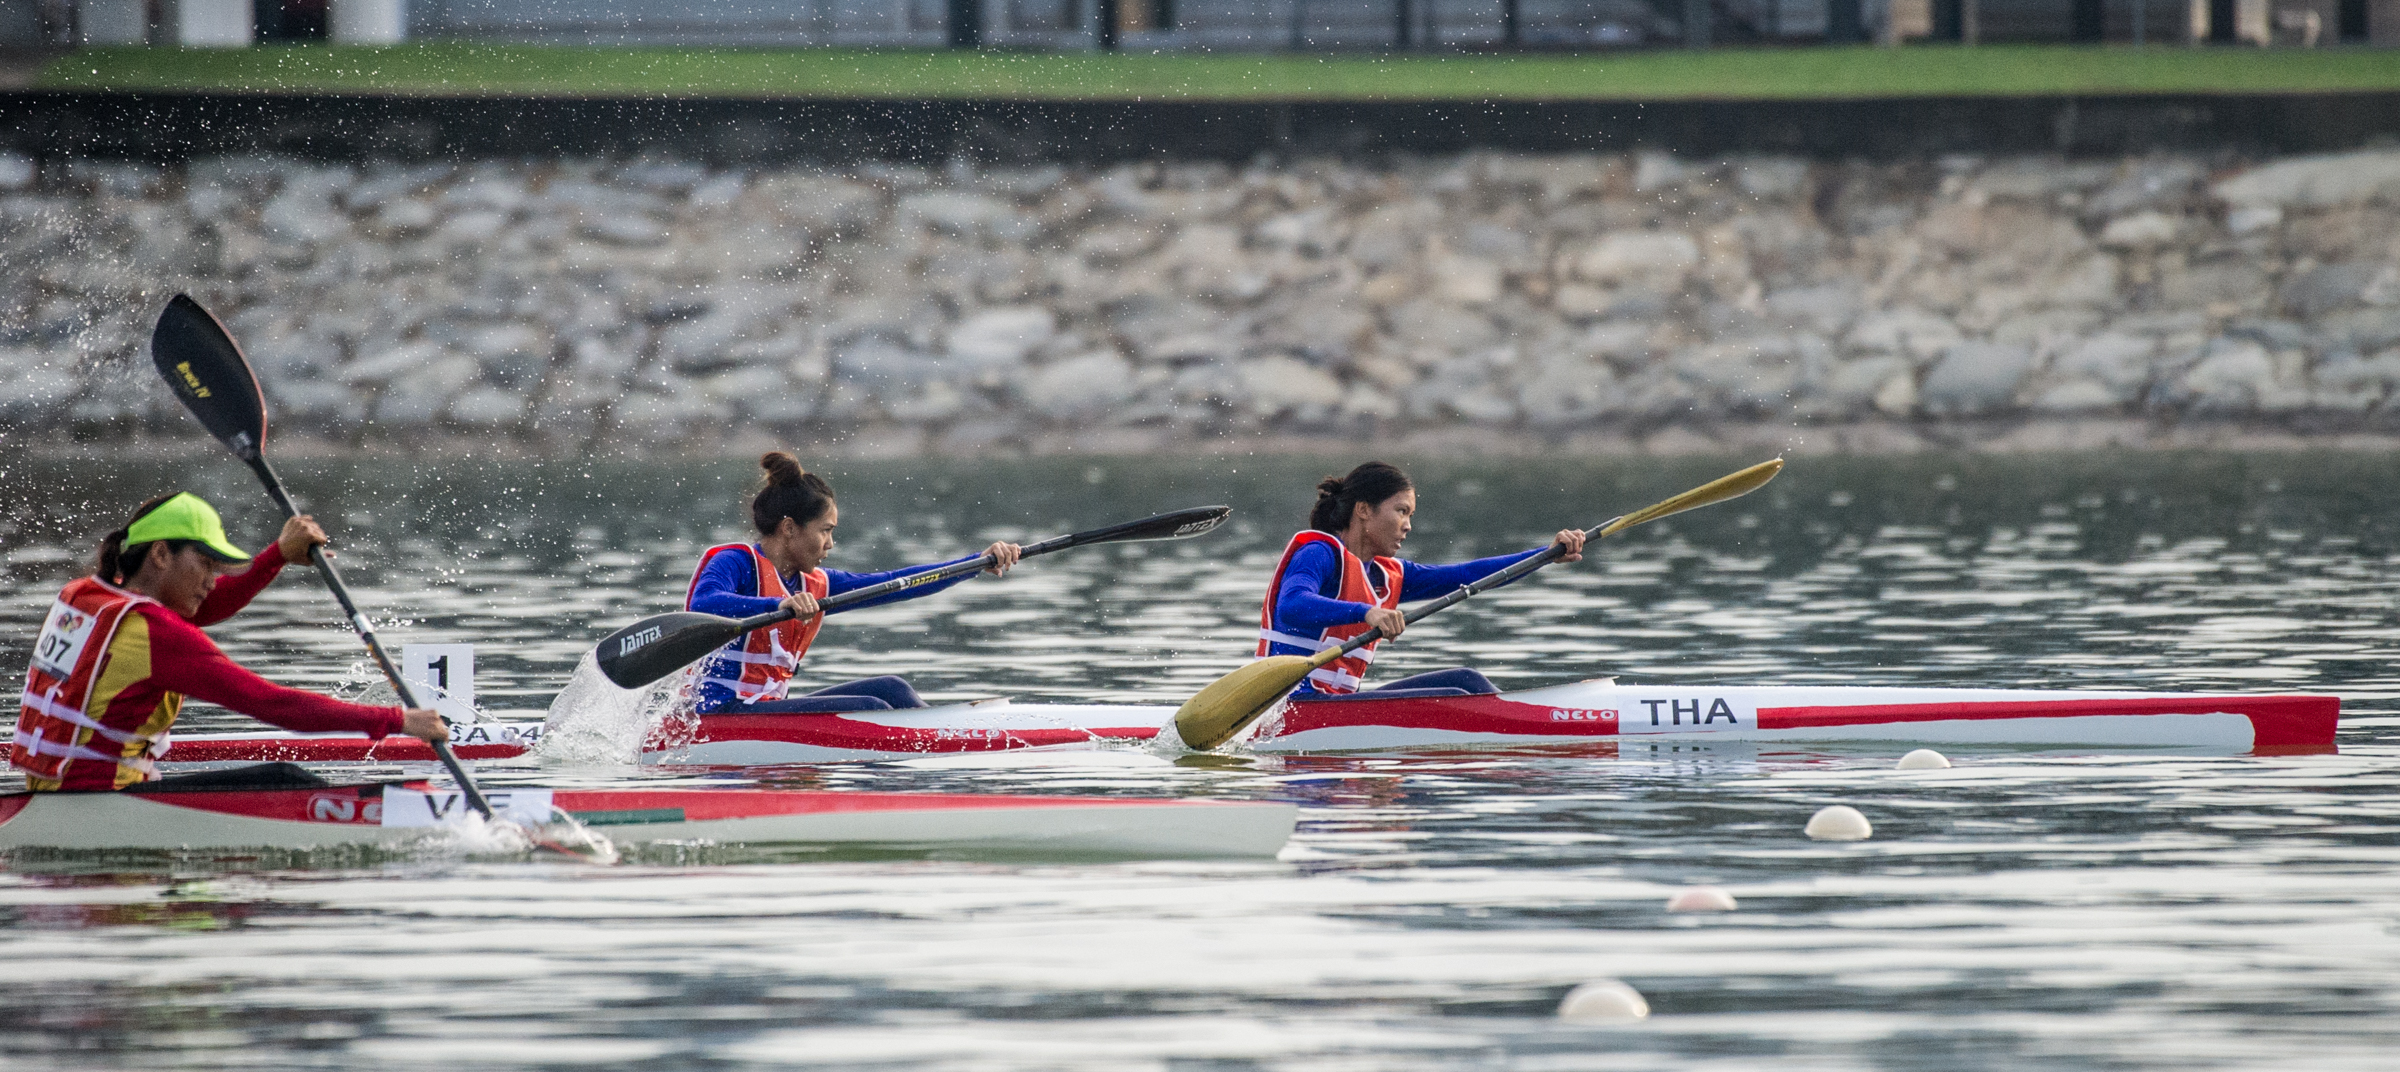 A Thai pair take an early lead in the Canoeing competition of the ASEAN University Games at the Marina Channel.